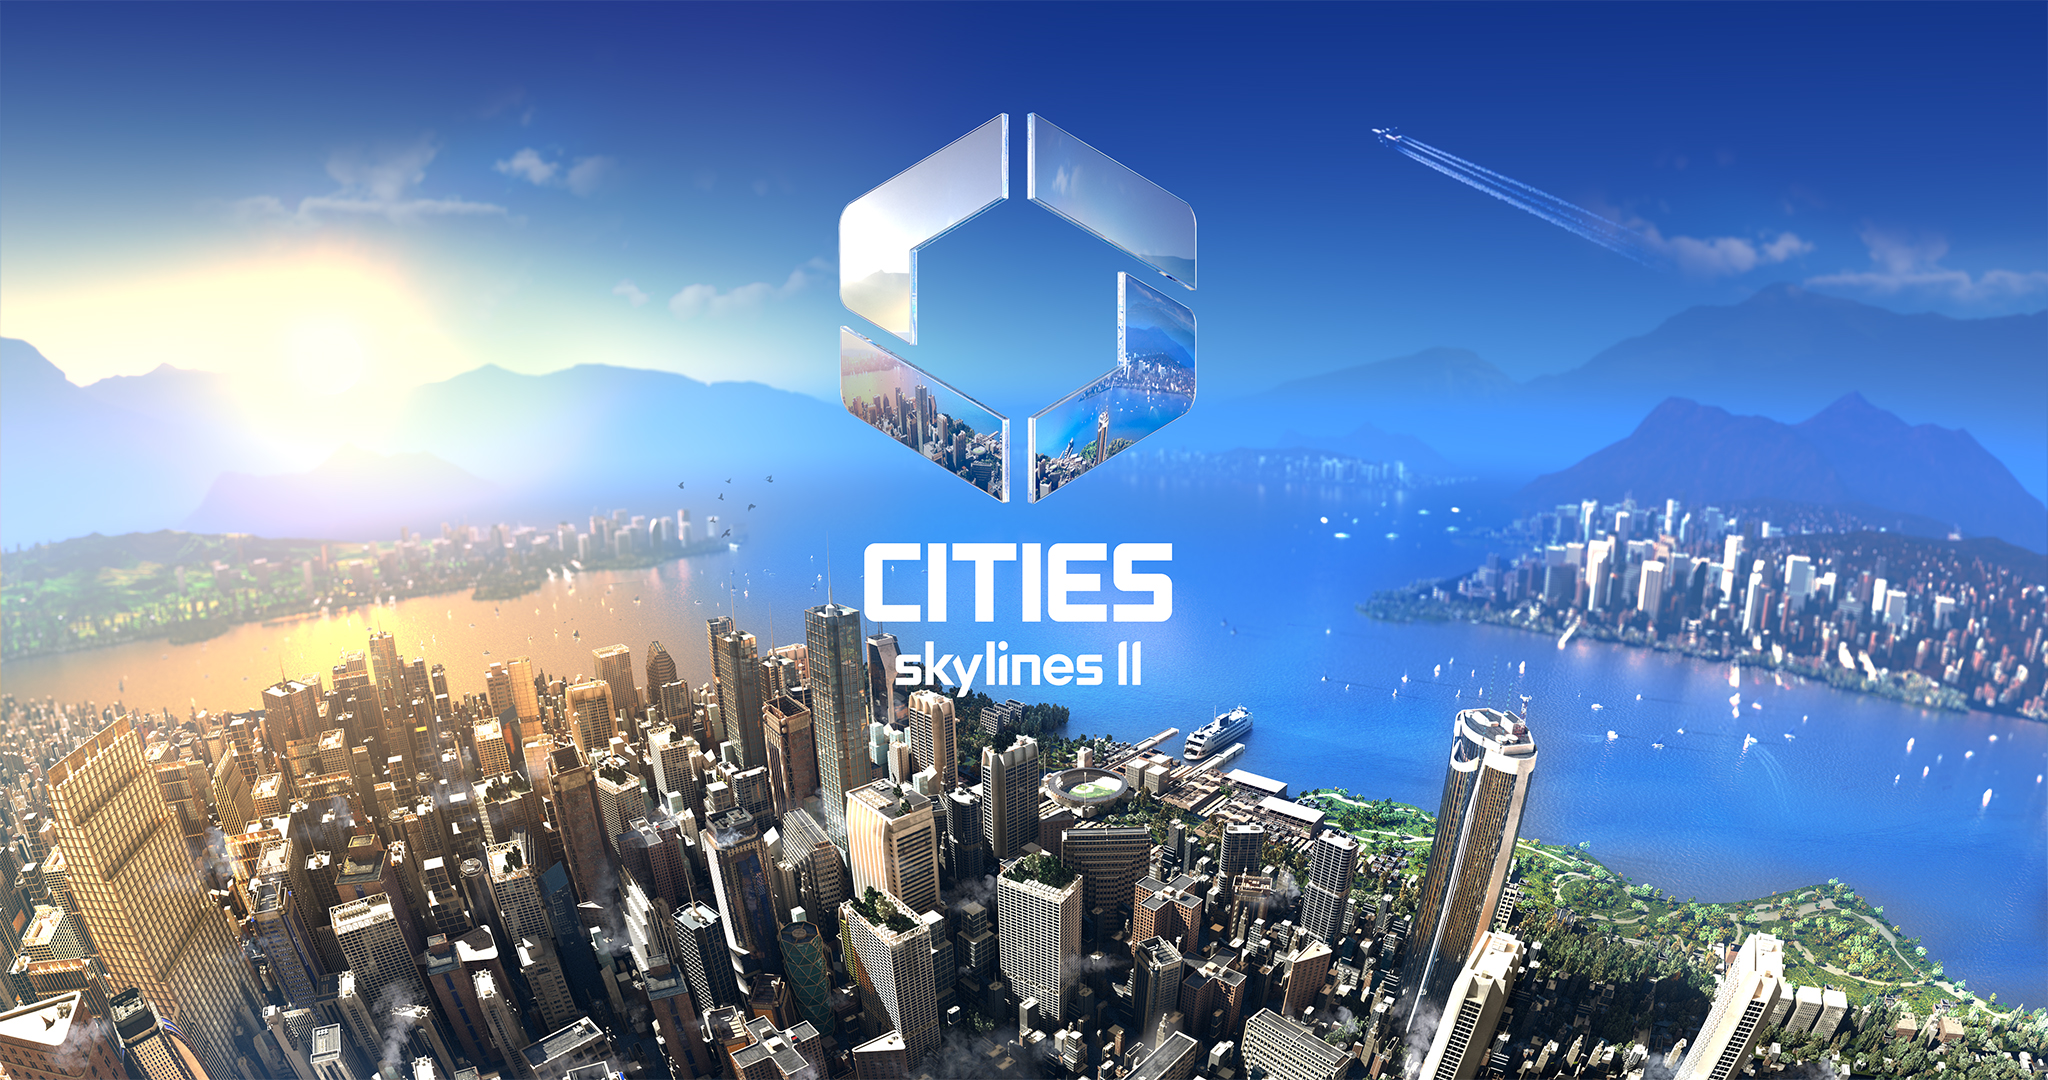 The key art for Cities: Skylines II.